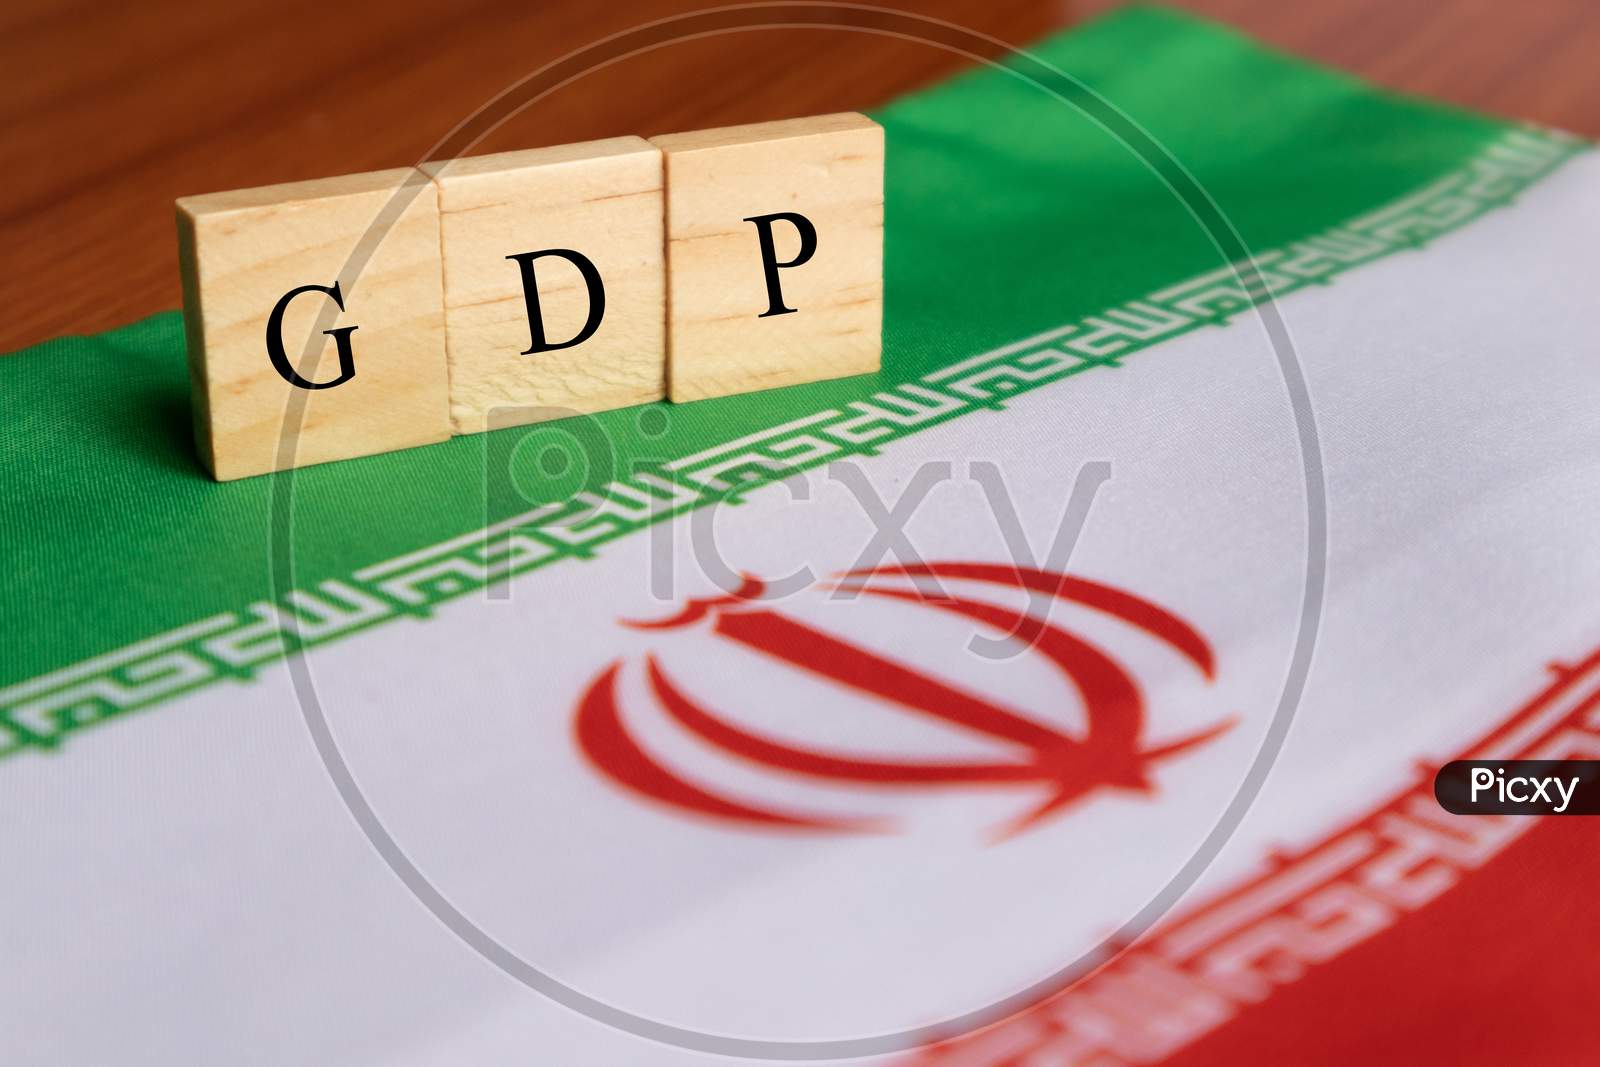 Gross Domestic Product Or Gdp Of Iran In Wooden Block Letters On Iran Flag.